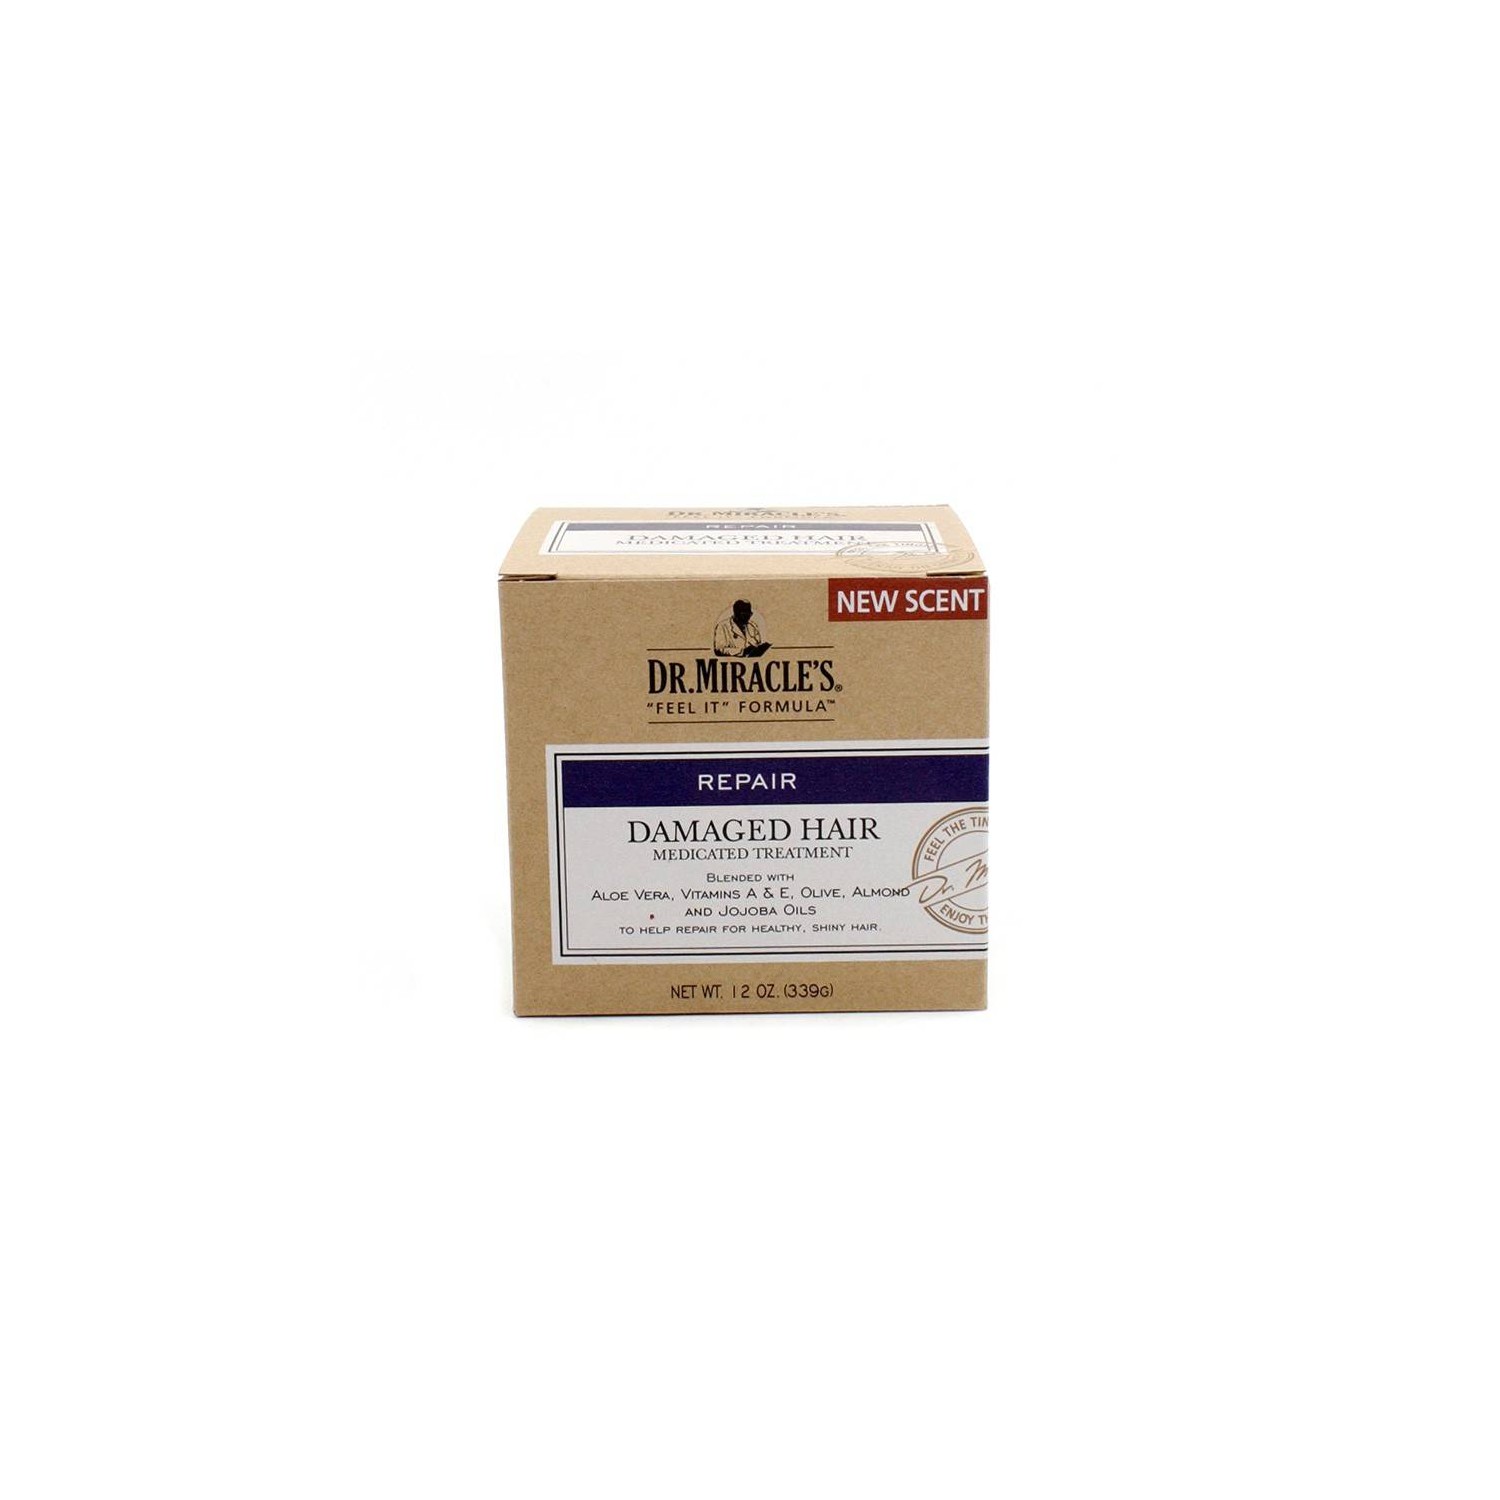 Dr. Miracles Damaged Hair Medicated Treatment 339 gr